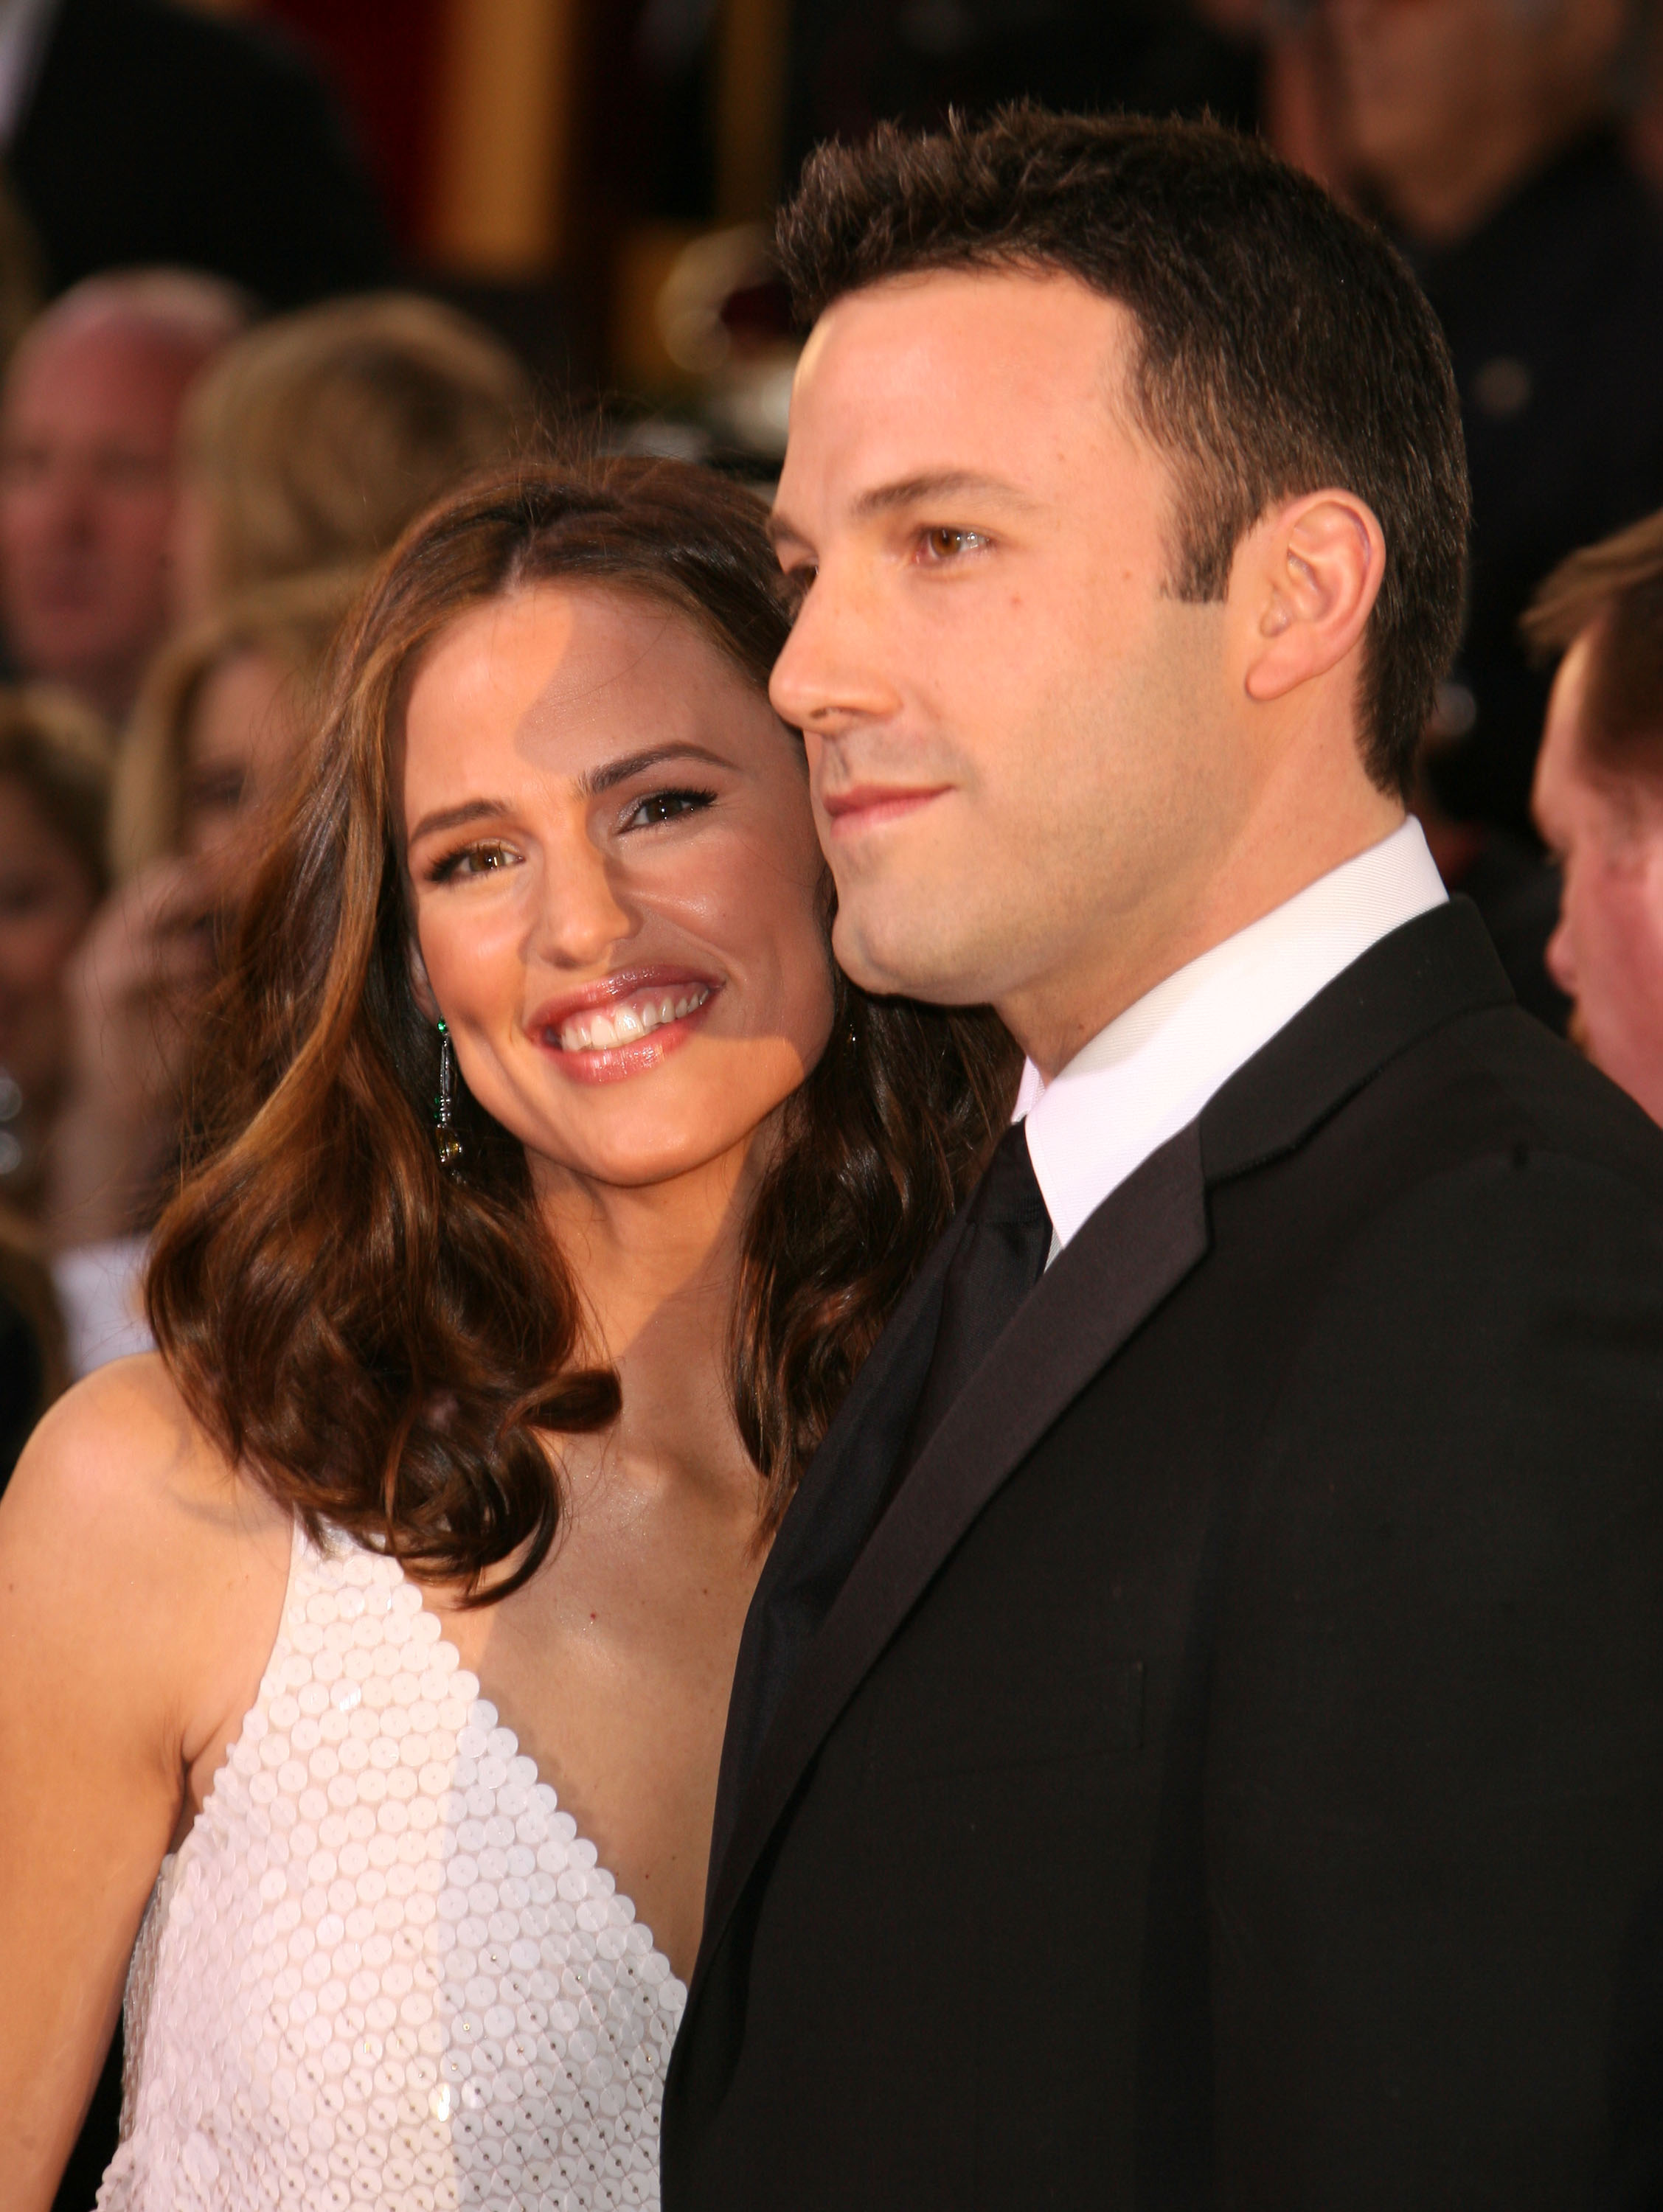 Jennifer Garner and Ben Affleck at the 64th Annual Golden Globe Awards on January 15, 2007 | Source: Getty Images